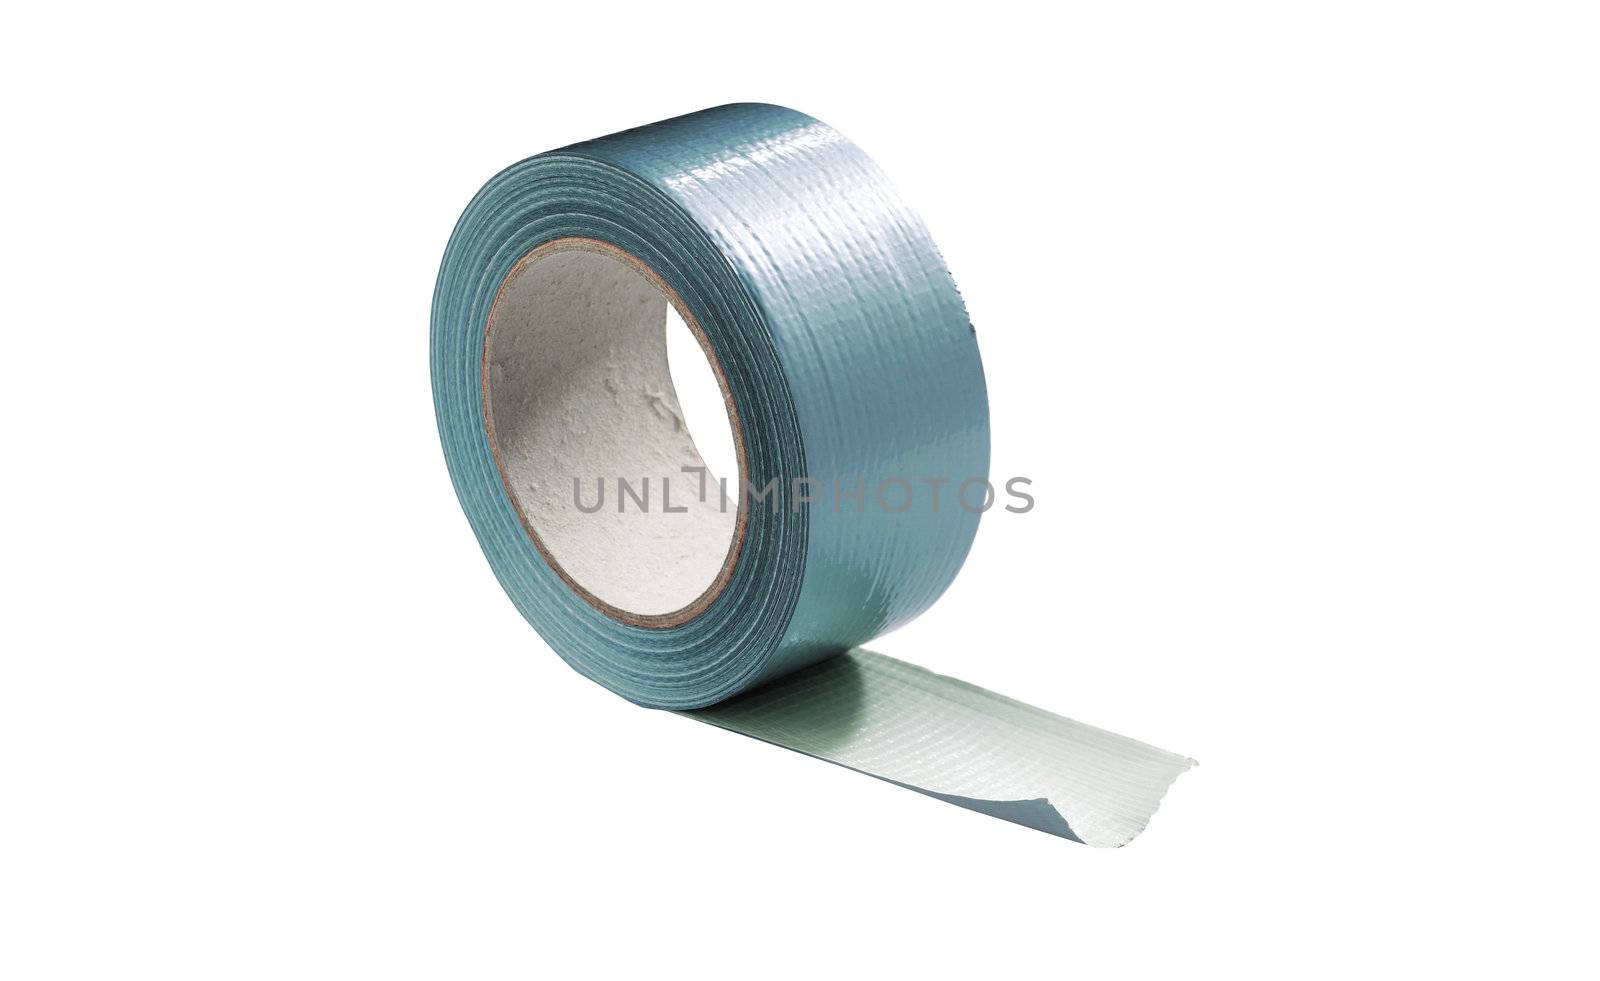 reel of adhesive repair tape isolated on white background